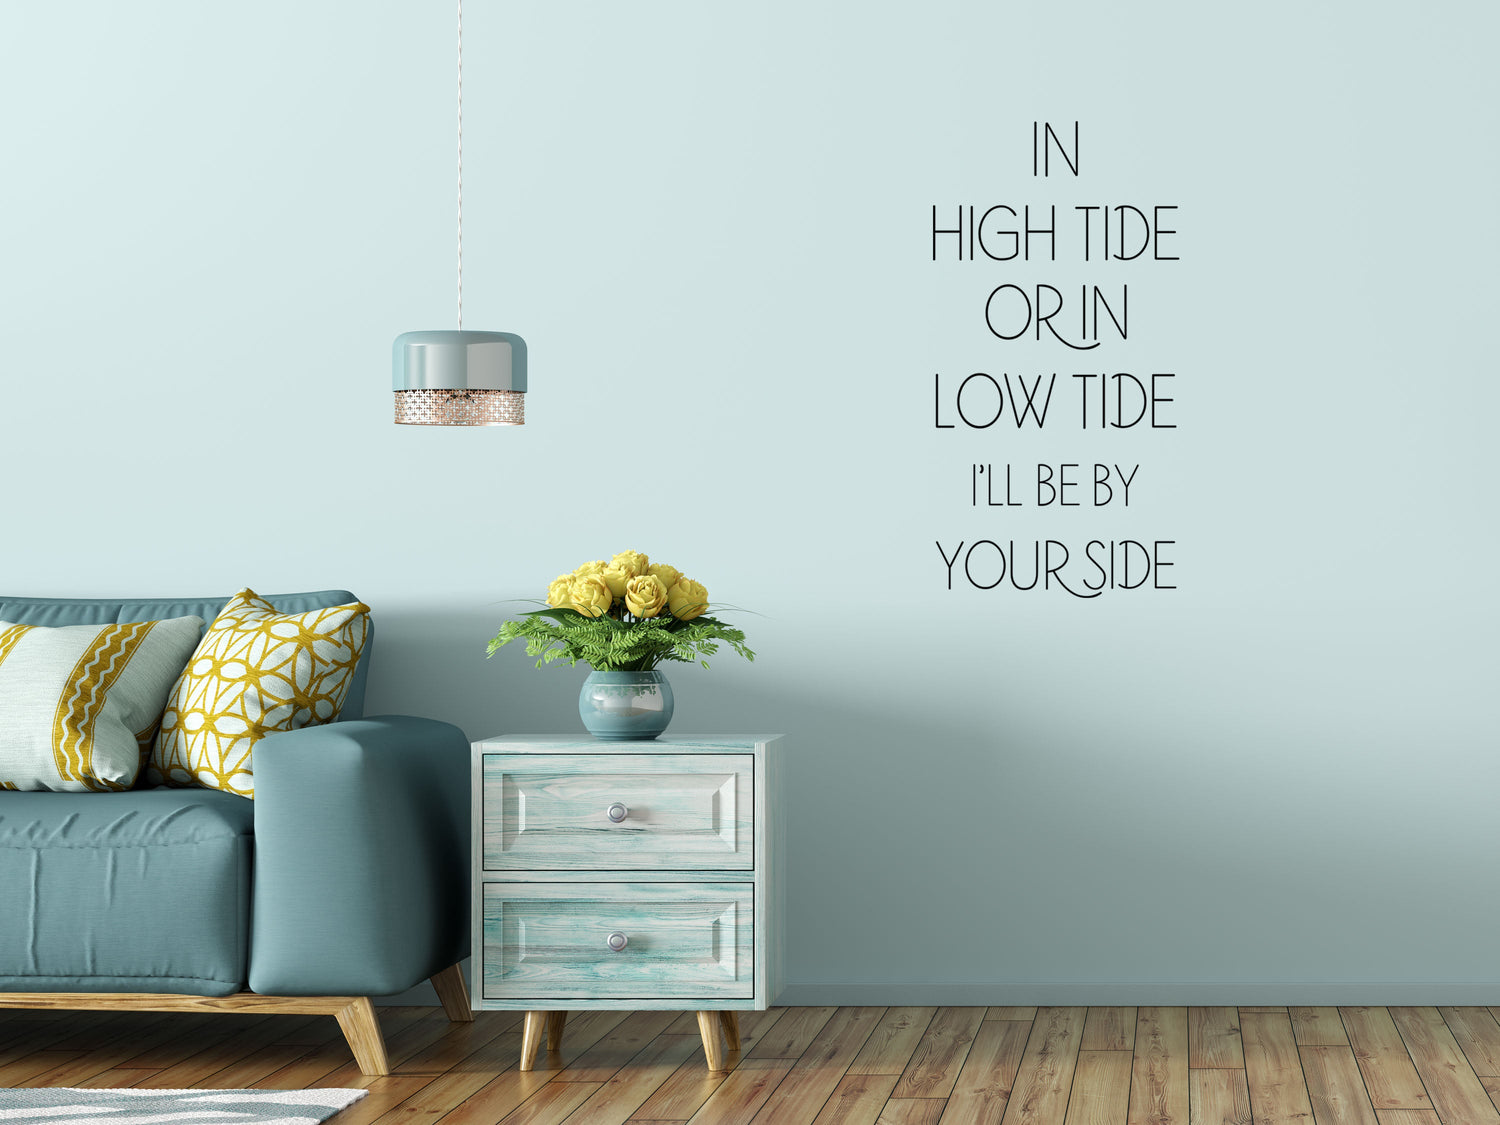 In High Tide or Low Tide - Inspirational Wall Decals Vinyl Wall Decal Inspirational Wall Signs 